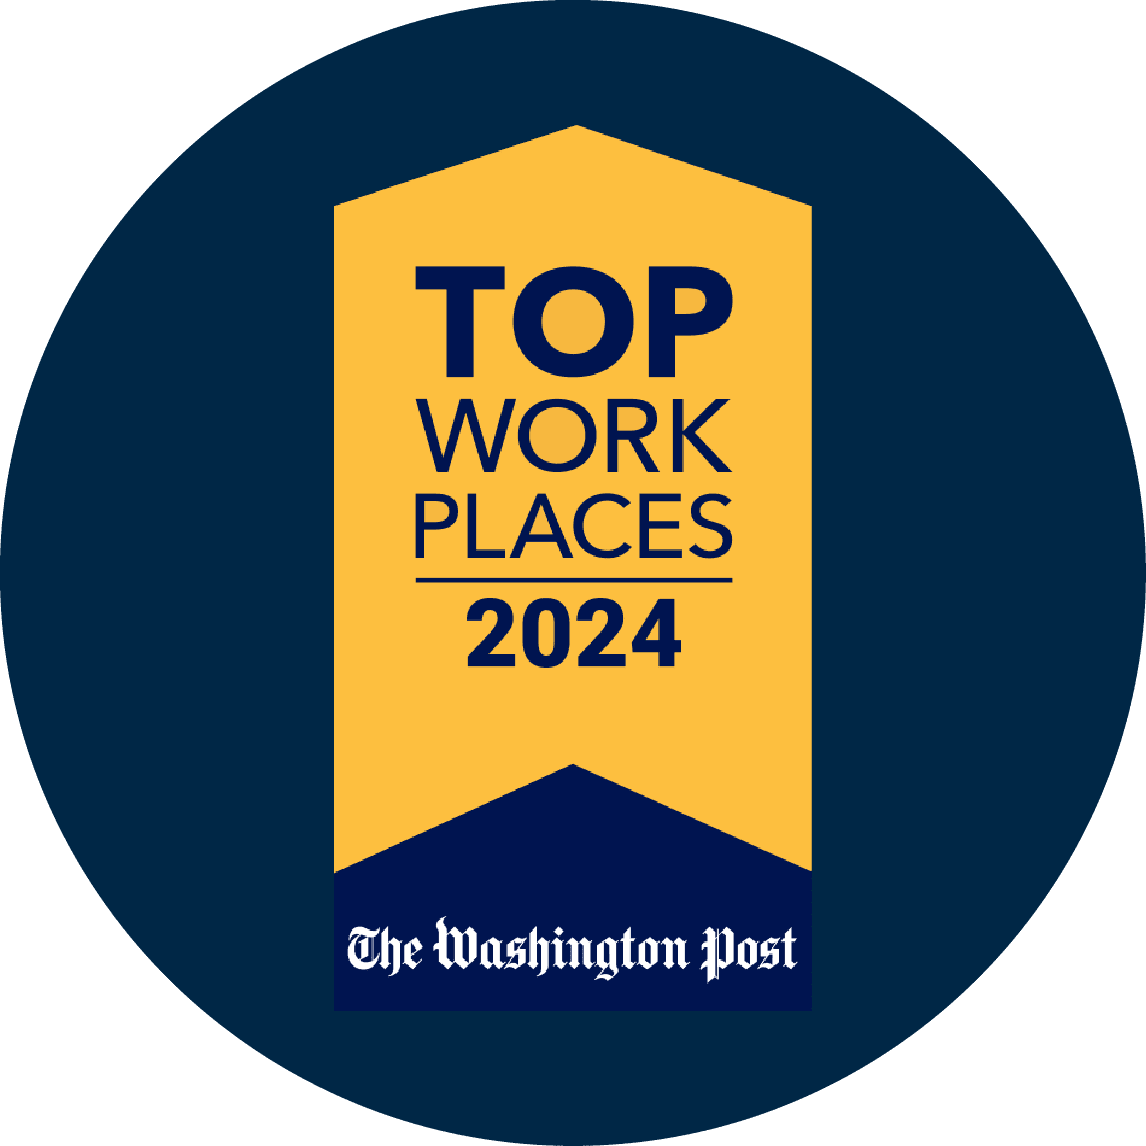 Top Work Places 2024 The Washington Post